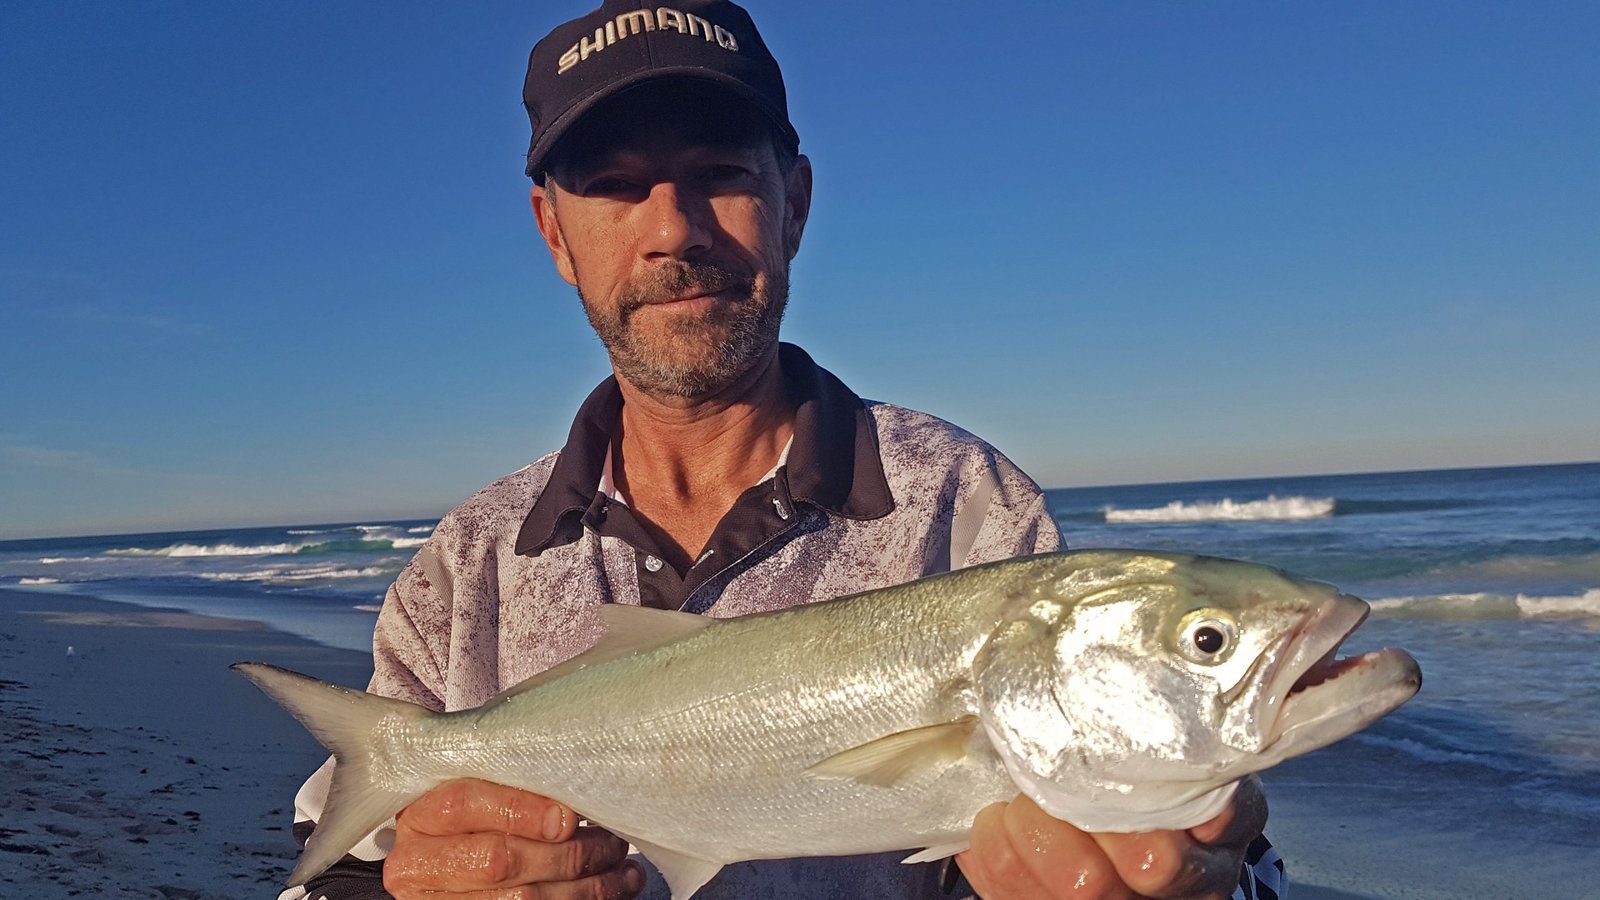 Nick Hocking with a Lancelin Tailor